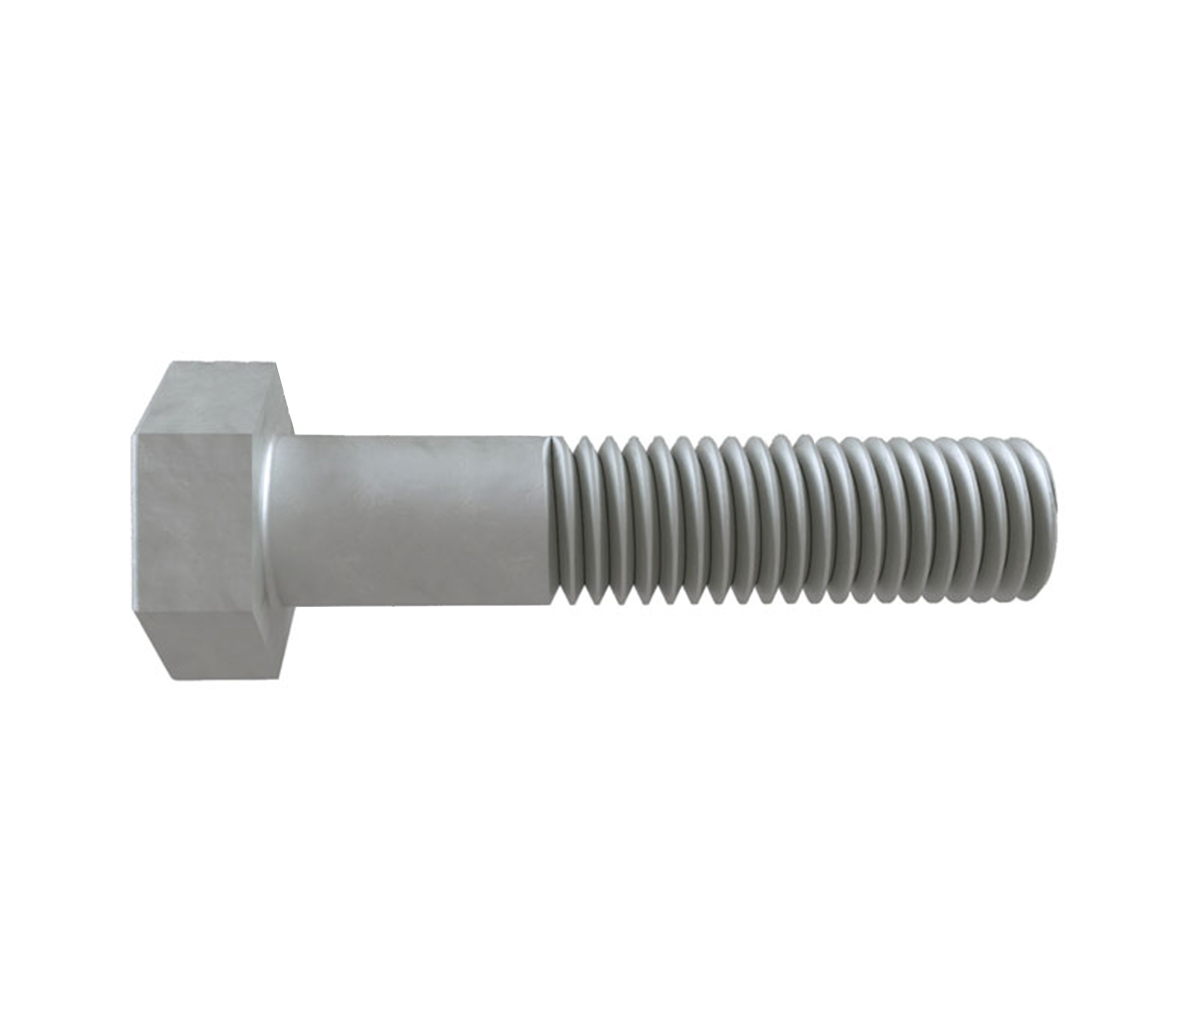 MiTek Bolts Engineered Systems Products - 3D render of a hex bolt